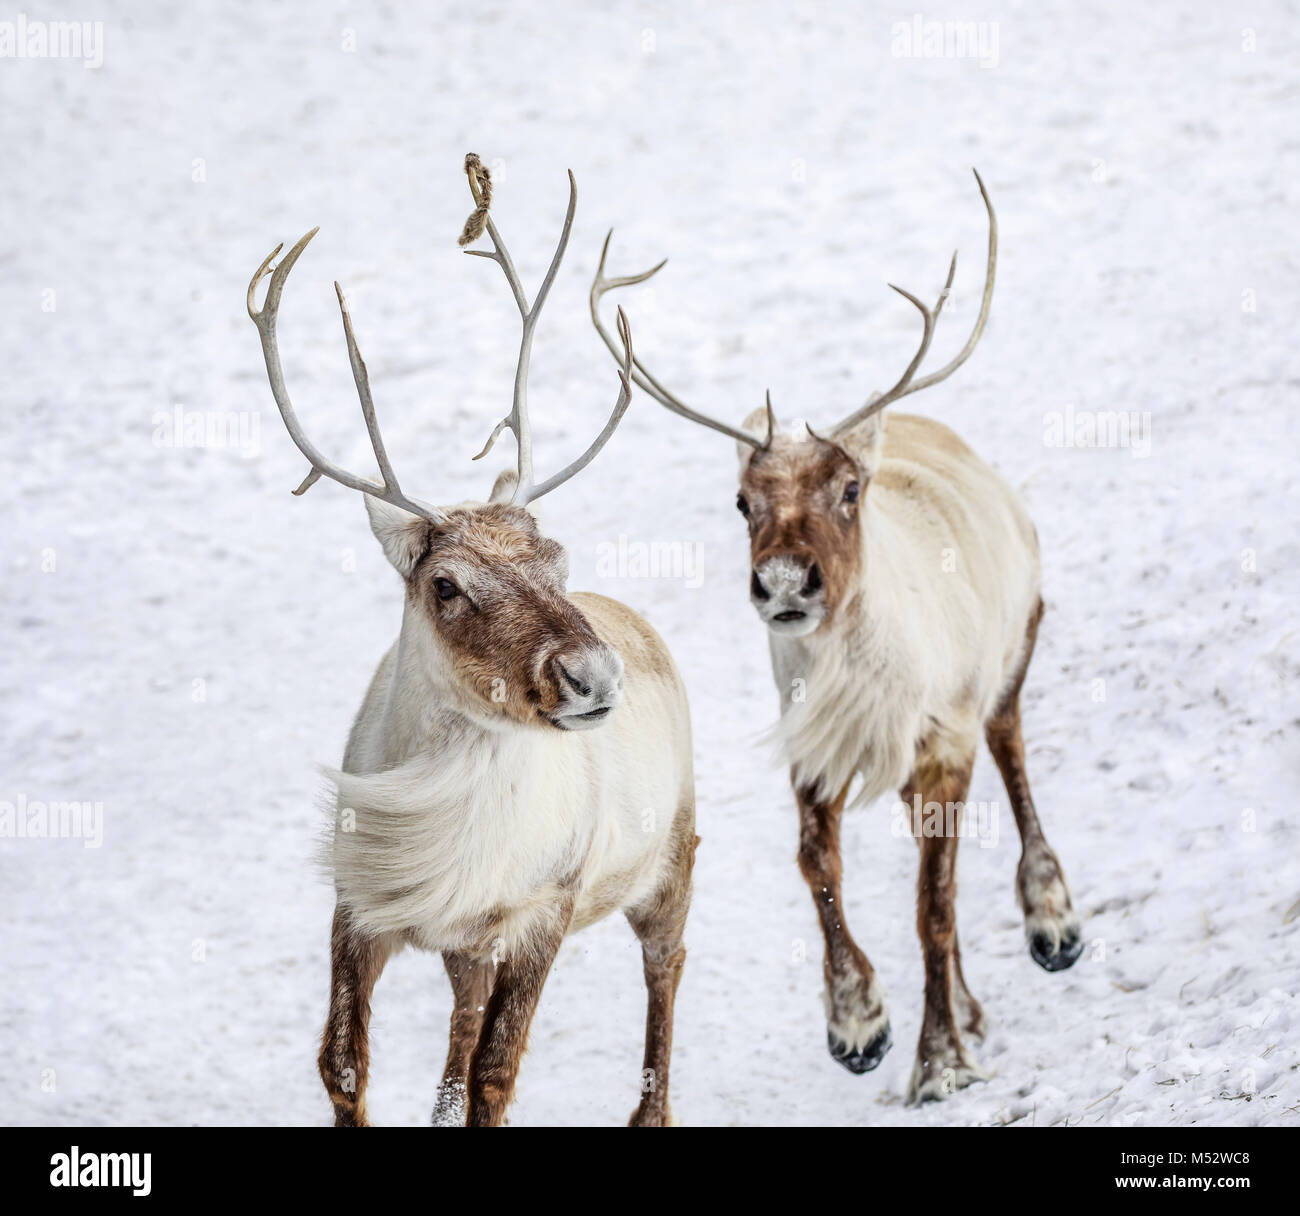 Reindeer, also known as the Boreal Woodland Caribou in North America, Rangifer tarandus, captive animal, Manitoba, Canada. Stock Photo